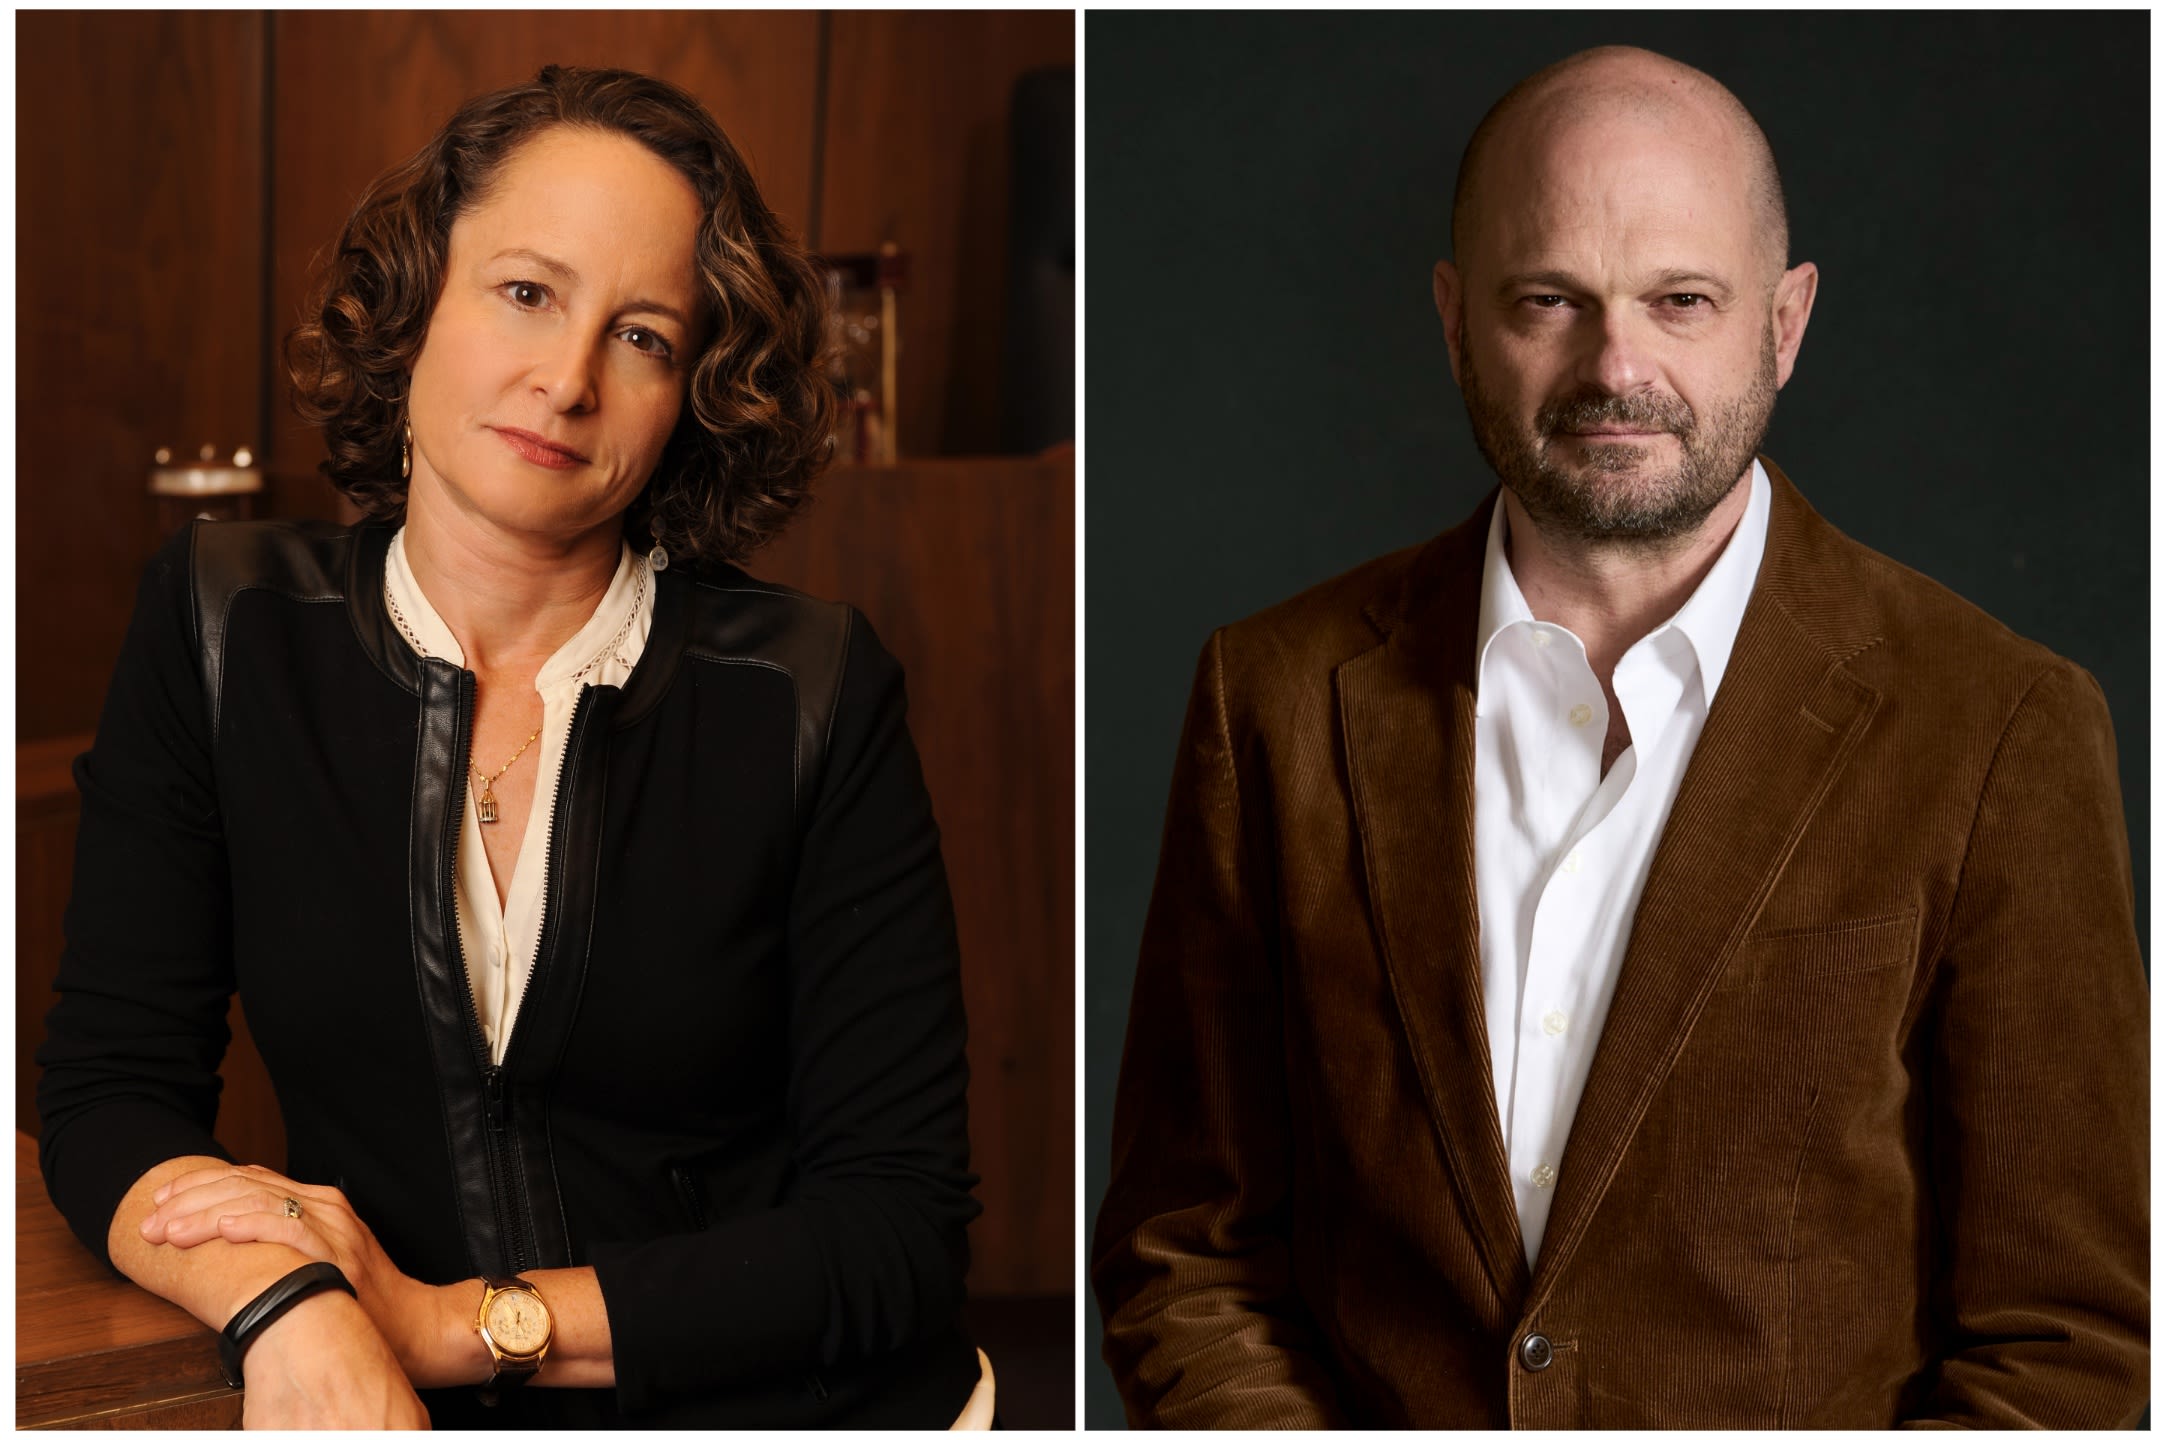 Nina Jacobson and Brad Simpson’s Color Force Signs Overall Film Deal With Sony